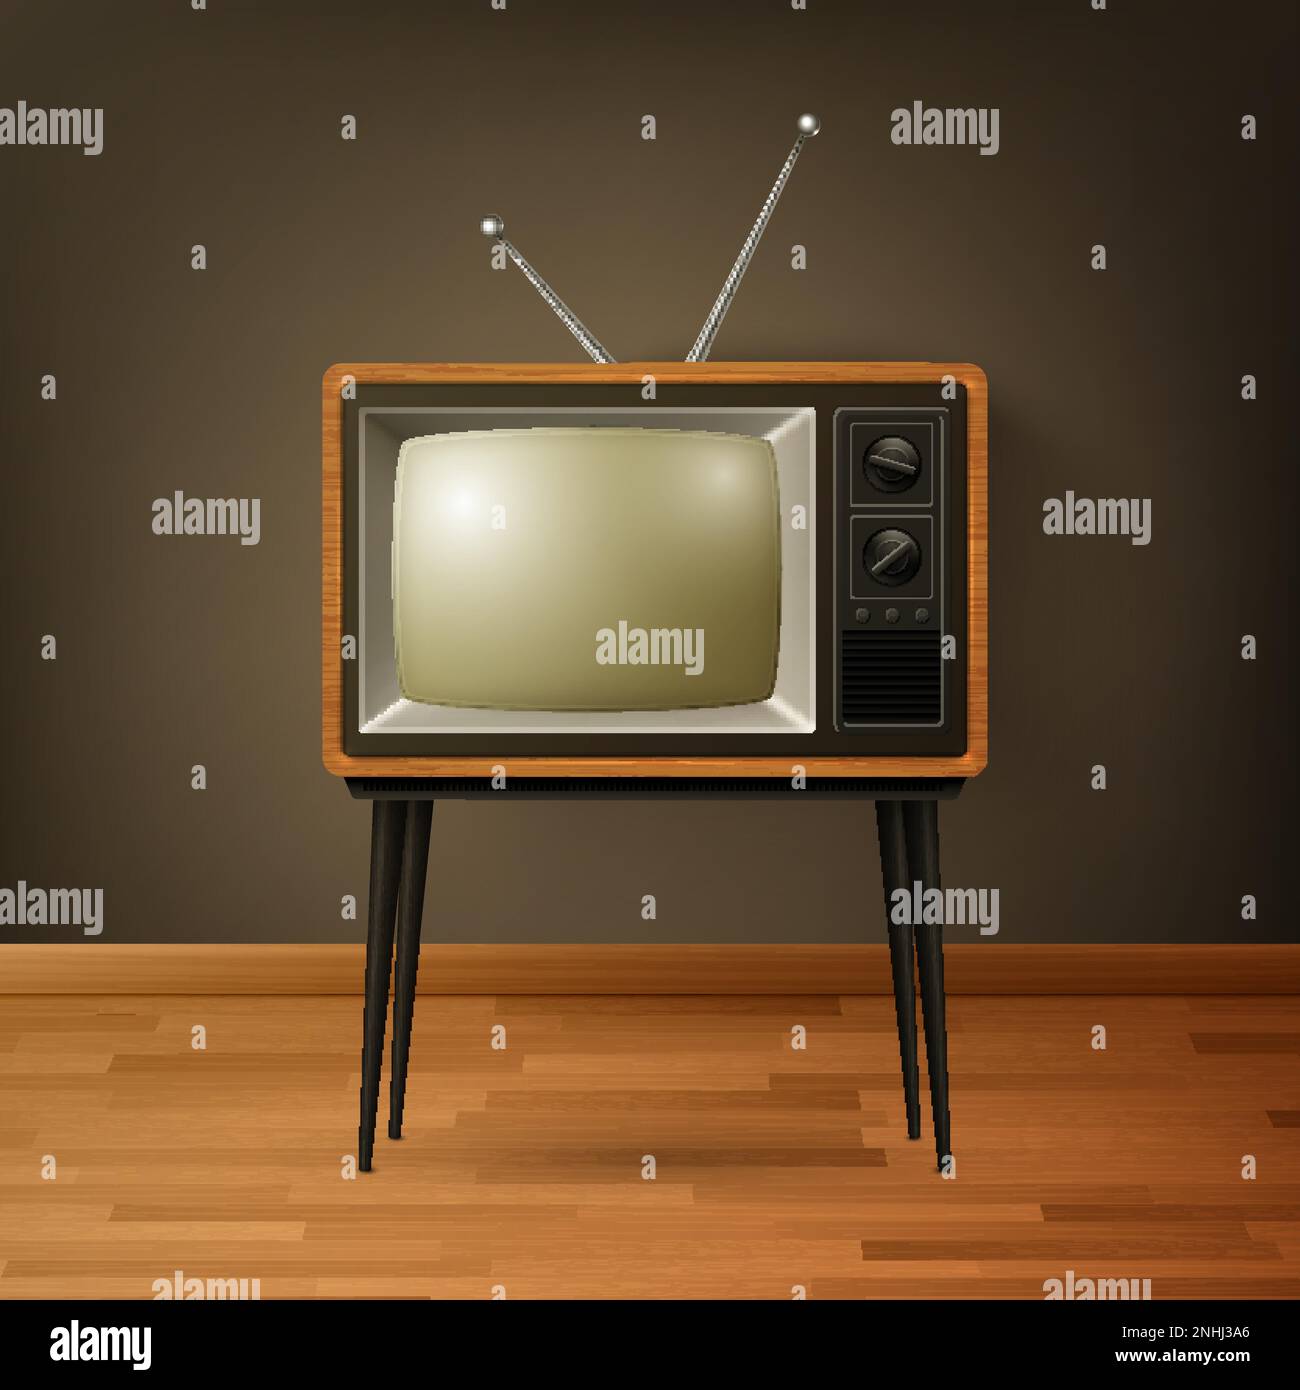 Vector 3d Realistic Brown Wooden Retro TV Receiver on Wooden Floor. Home Interior Design Concept. Vintage TV Set, Television, Front View Stock Vector